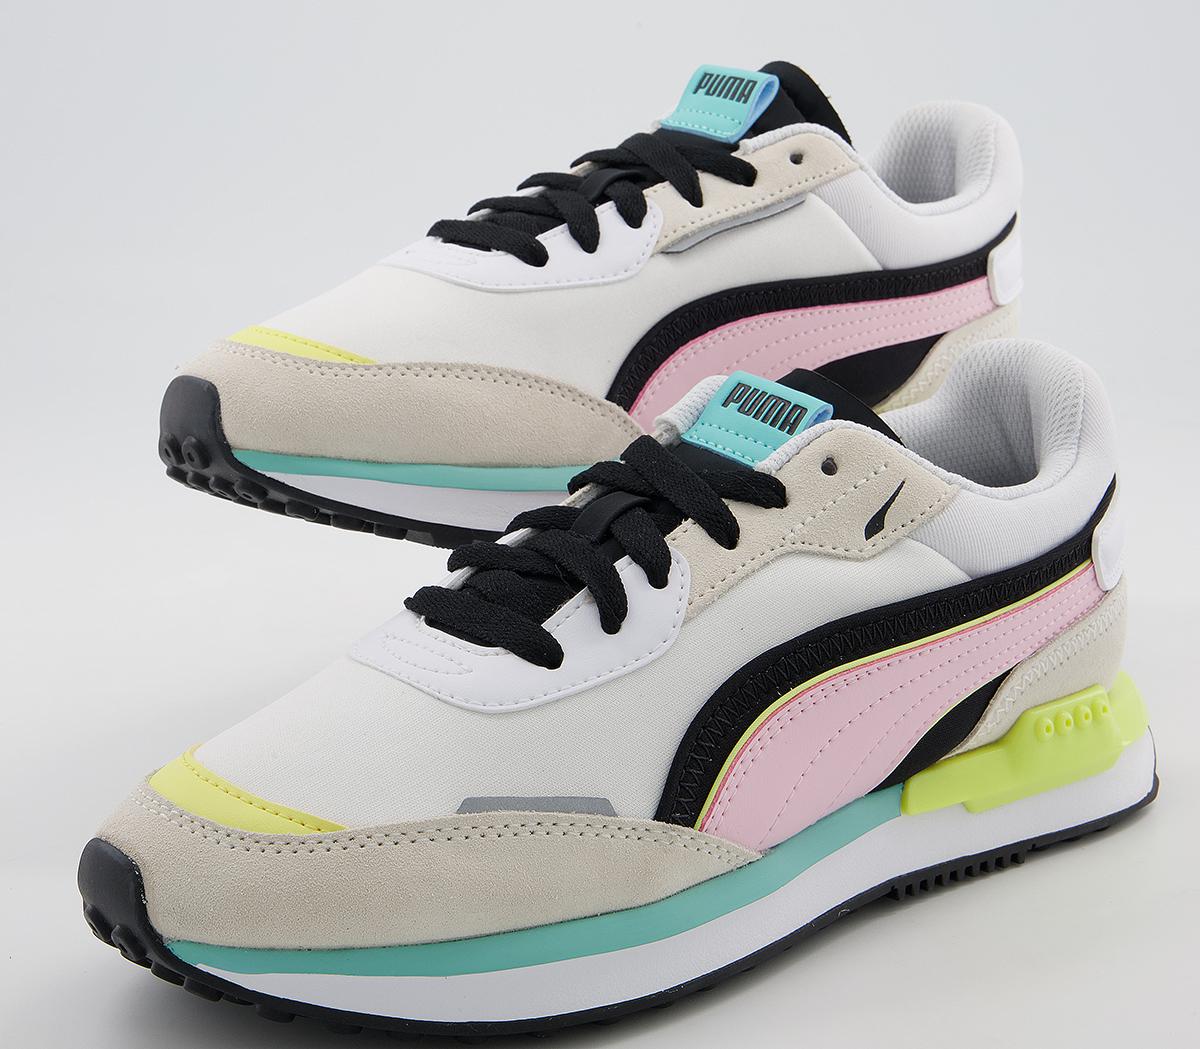 PUMA City Rider Trainers Grey Pink Lady - Women's Trainers